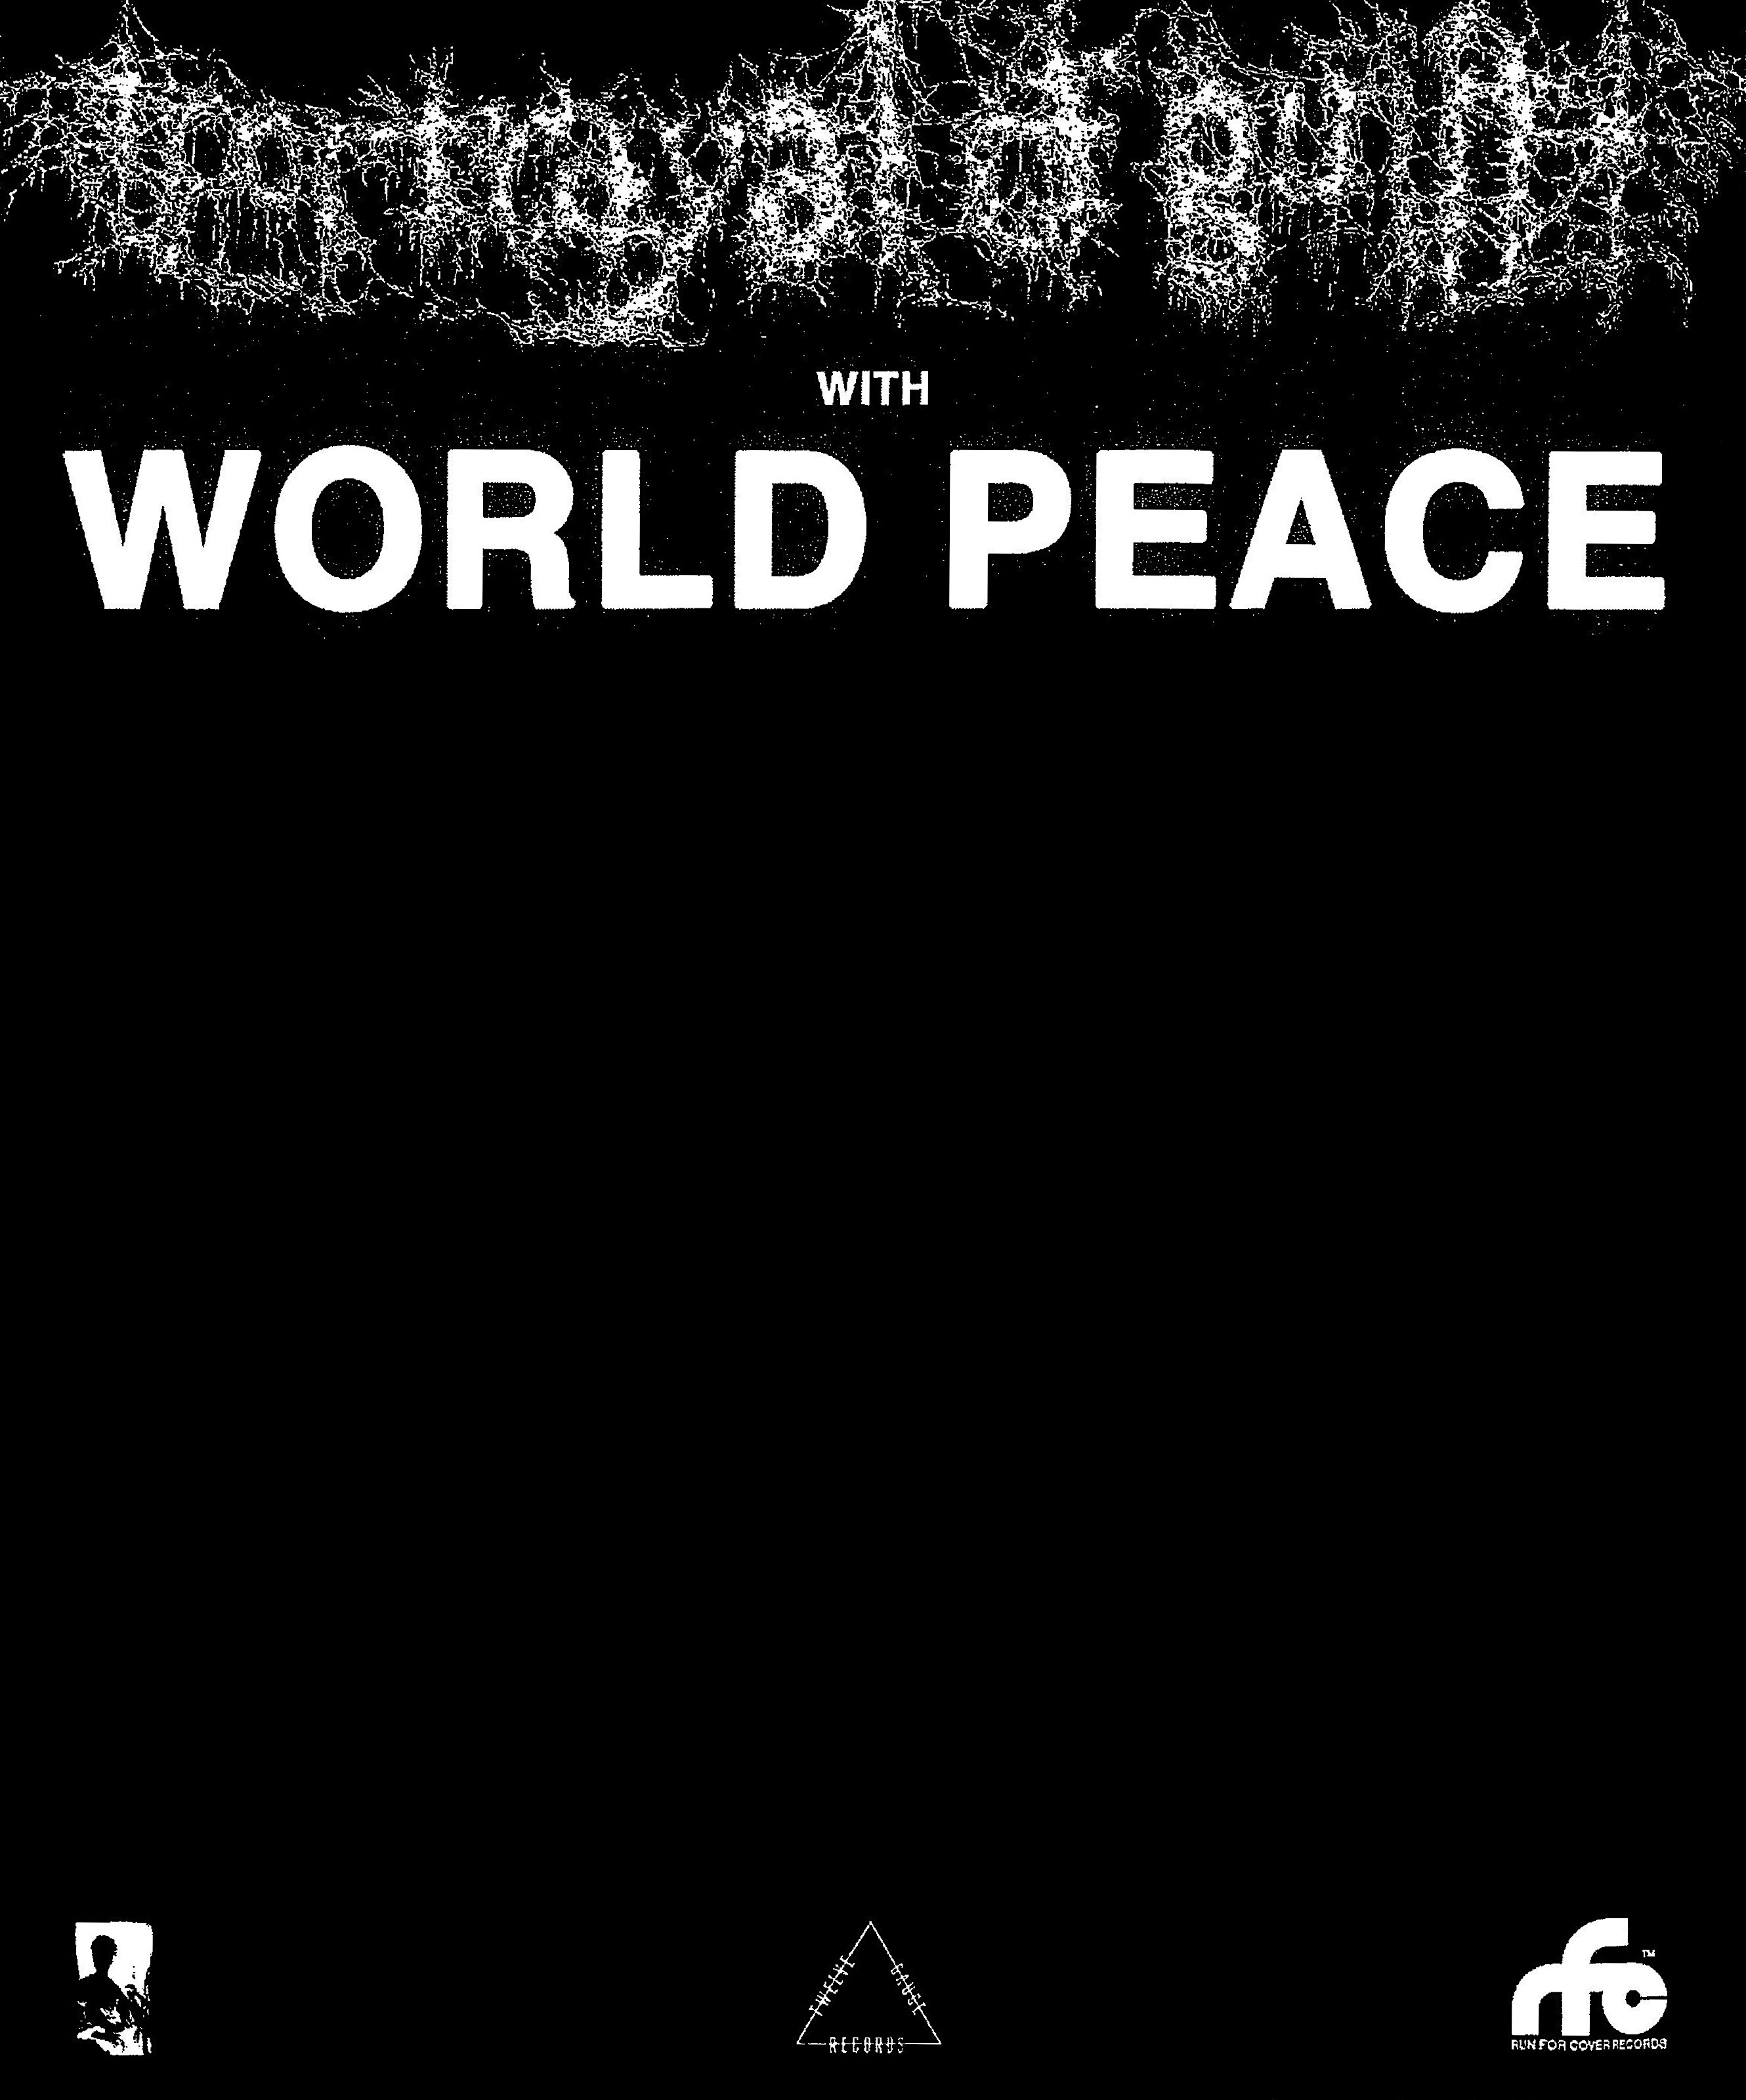 Portrayal of Guilt, World Peace, and More in Orlando at Will's Pub